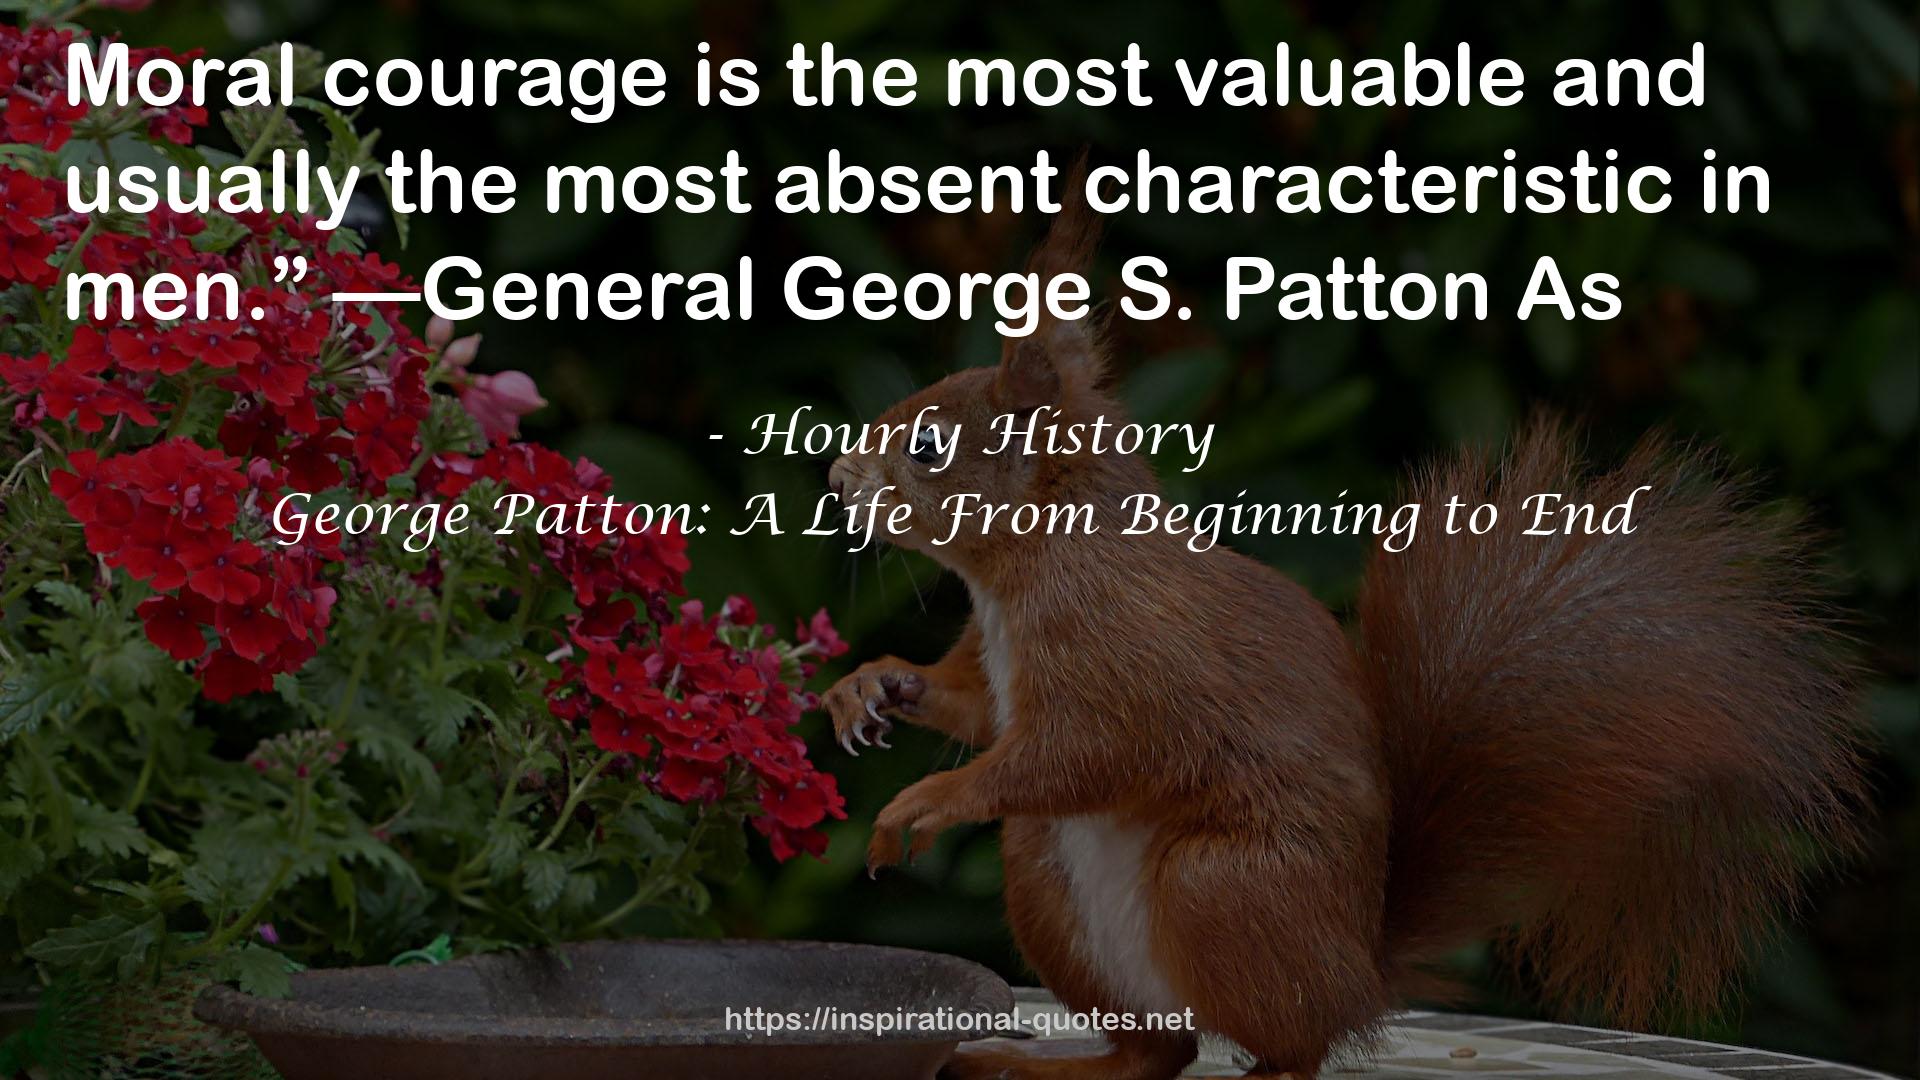 George Patton: A Life From Beginning to End QUOTES